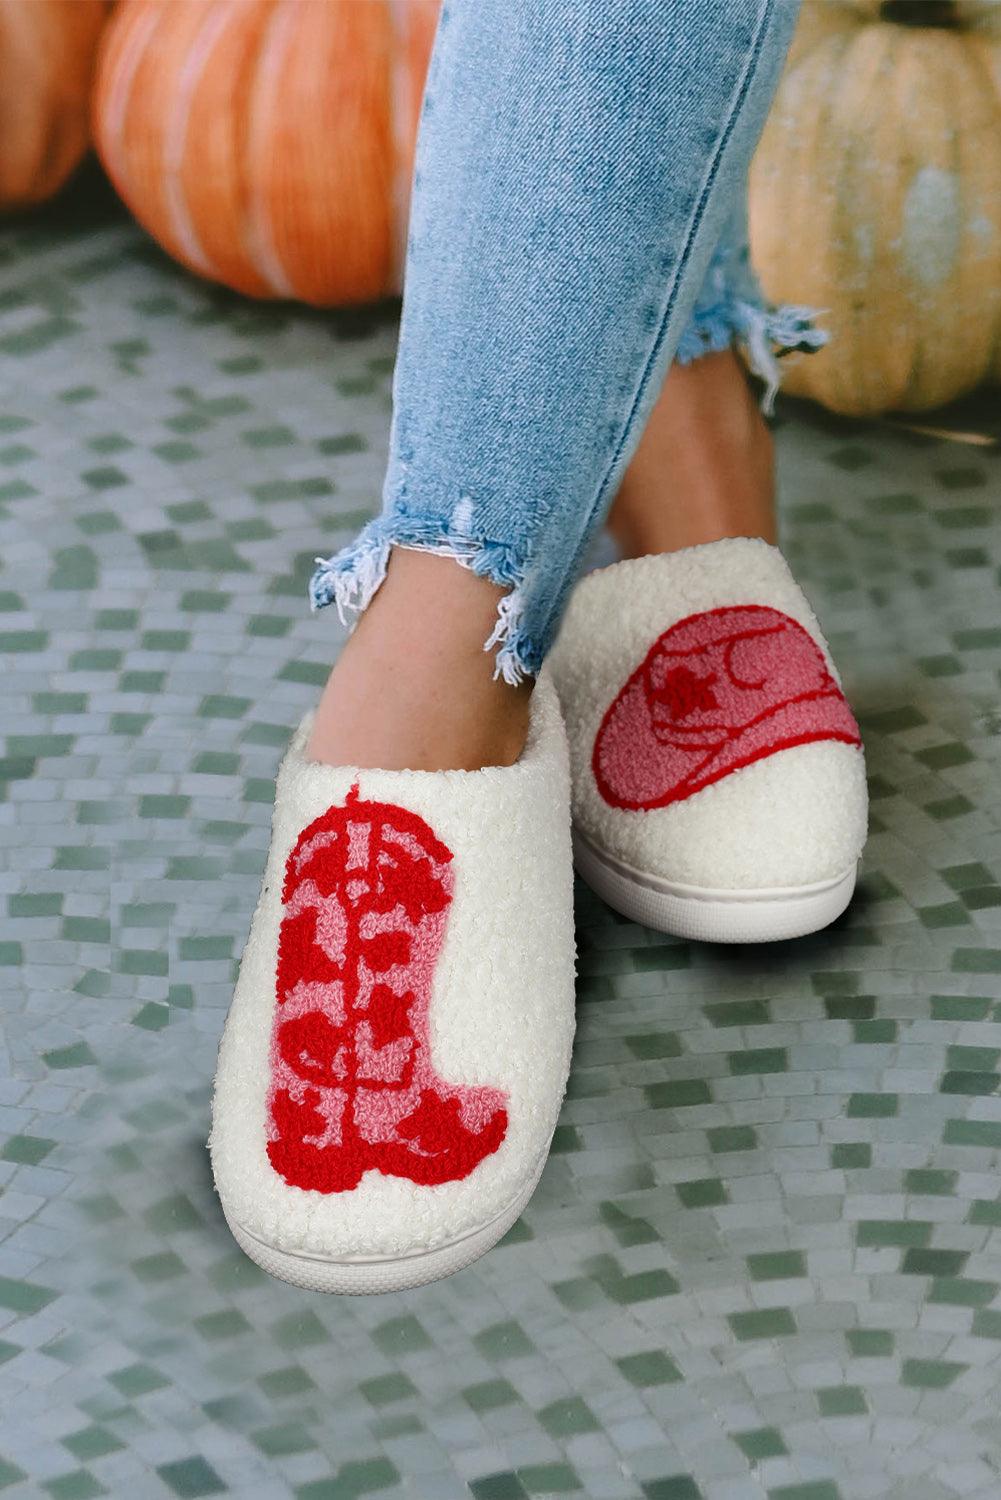 Rush Western Graphic Embroidered Sherpa Home Slippers - L & M Kee, LLC